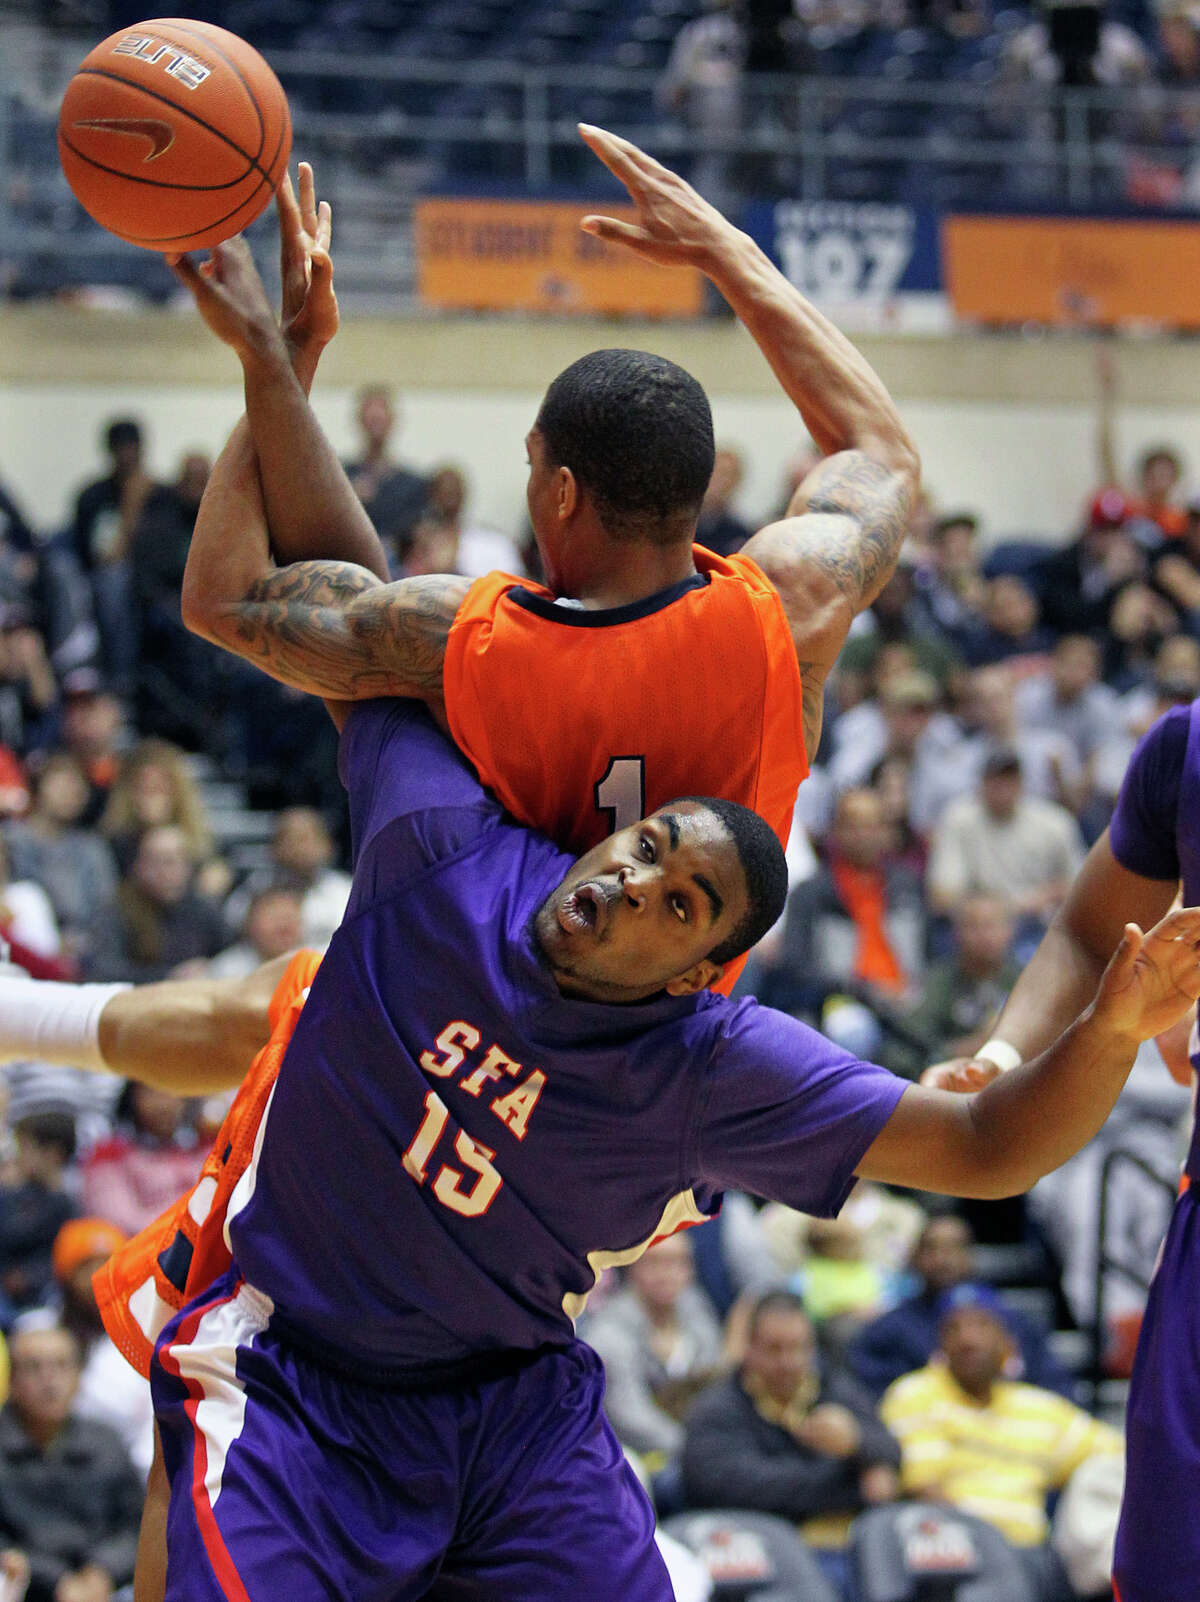 SFA's Joe Bright moves under the rebounding effort of Stephen Franklin and is called for a position foul as the Roadrunners play the SFA Lumberjacks at the UTSA Convocation Center on February 11, 2012.